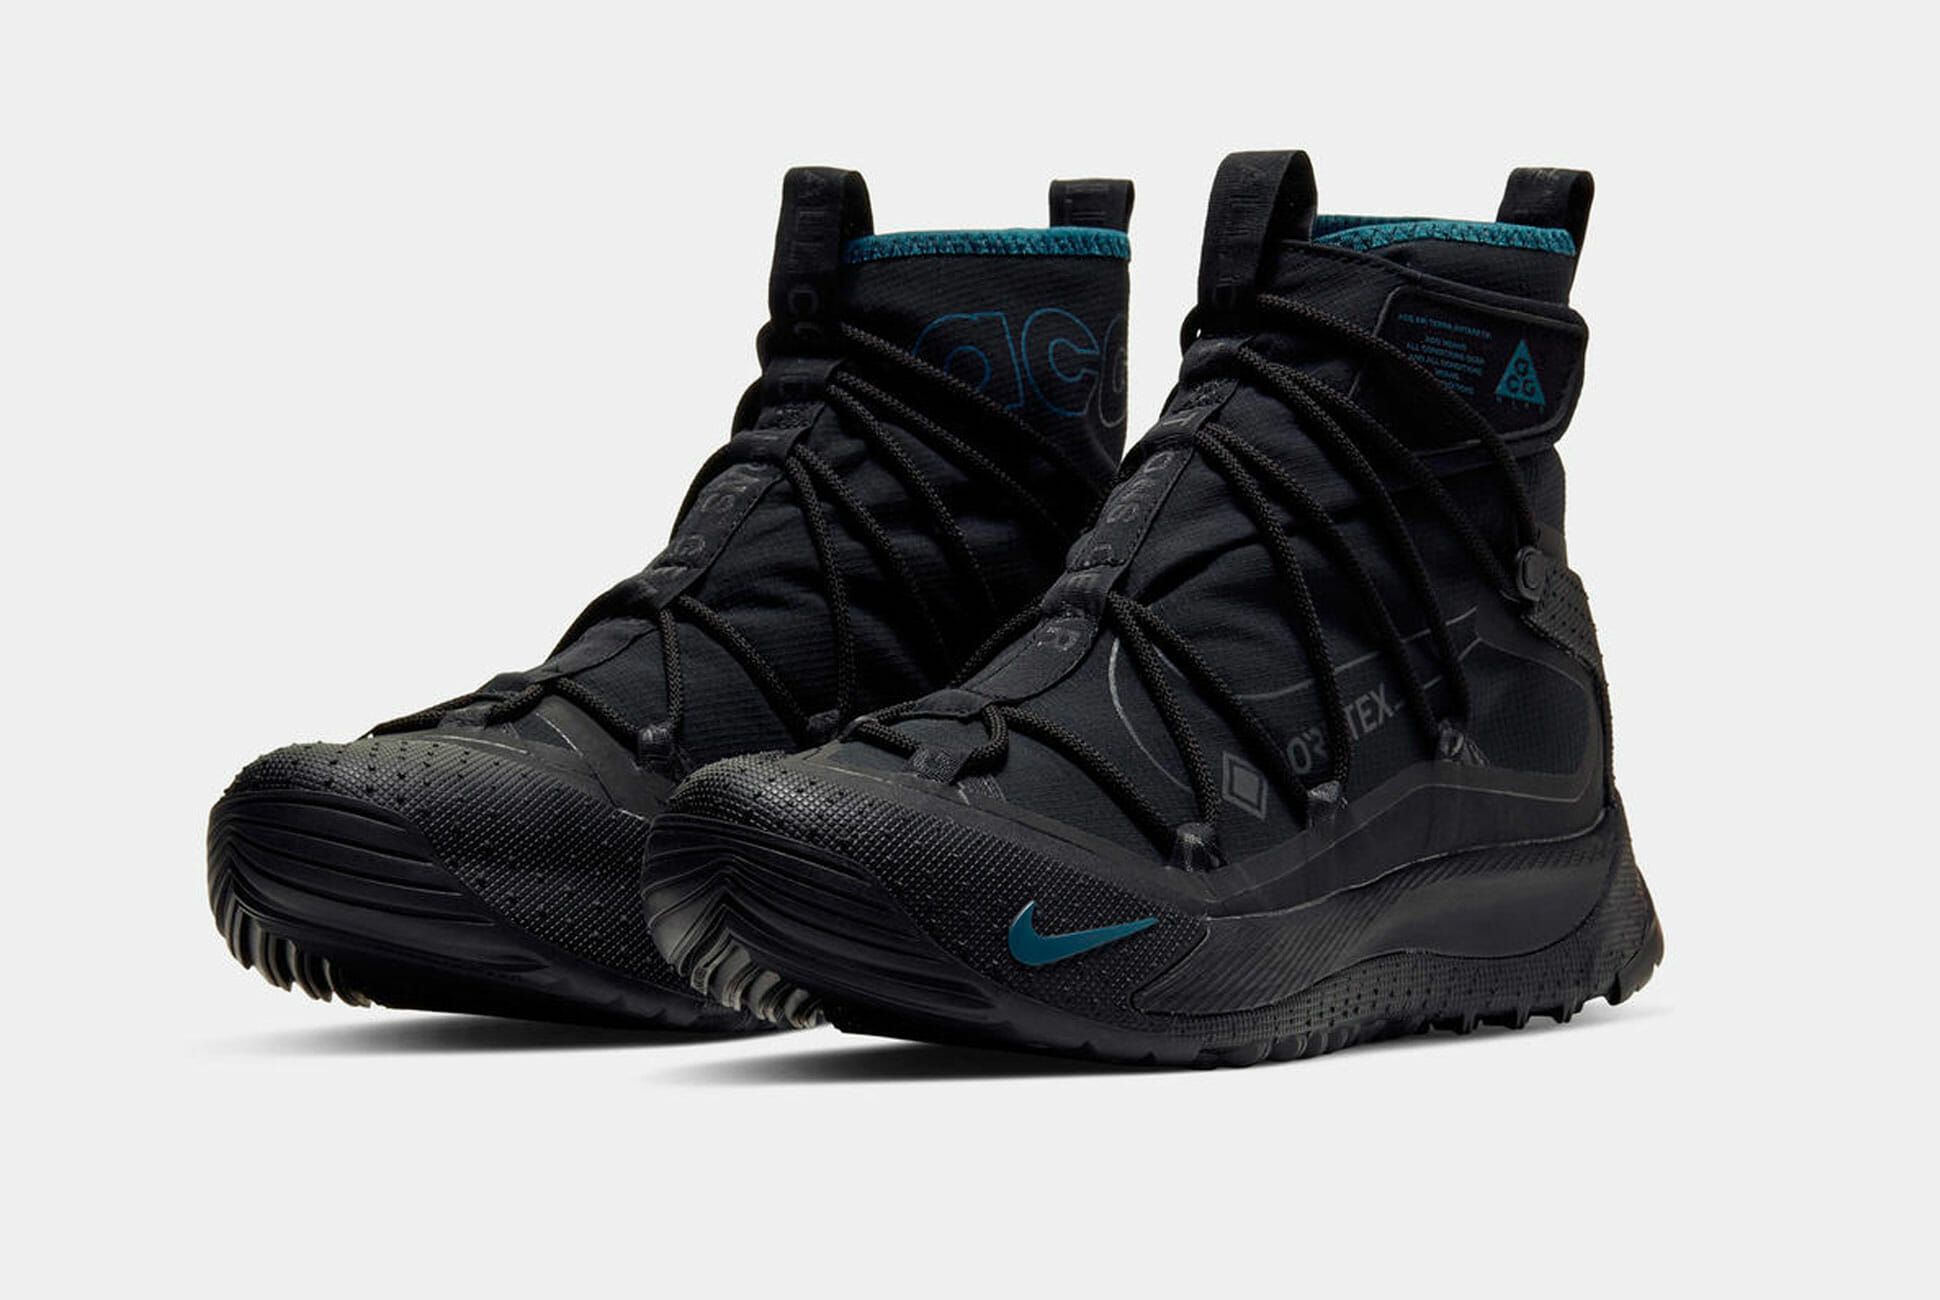 Nike's New Winter Boots Are Unlike Any 